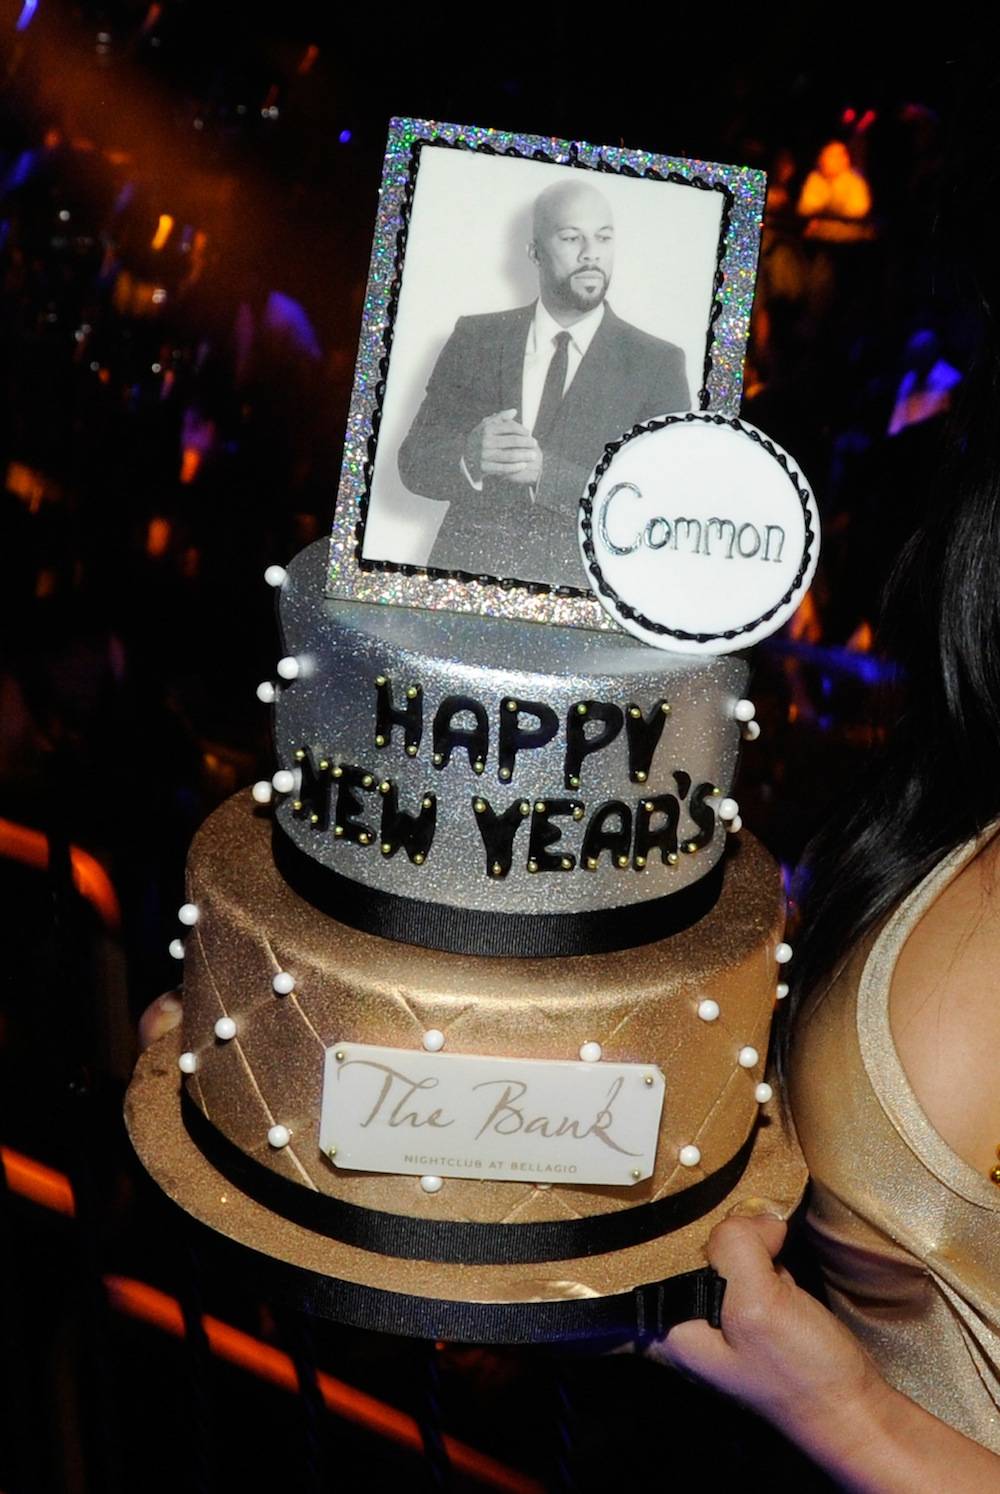 Common Celebrates New Year's Eve At The Bank Nightclub At Bellagio In Las Vegas